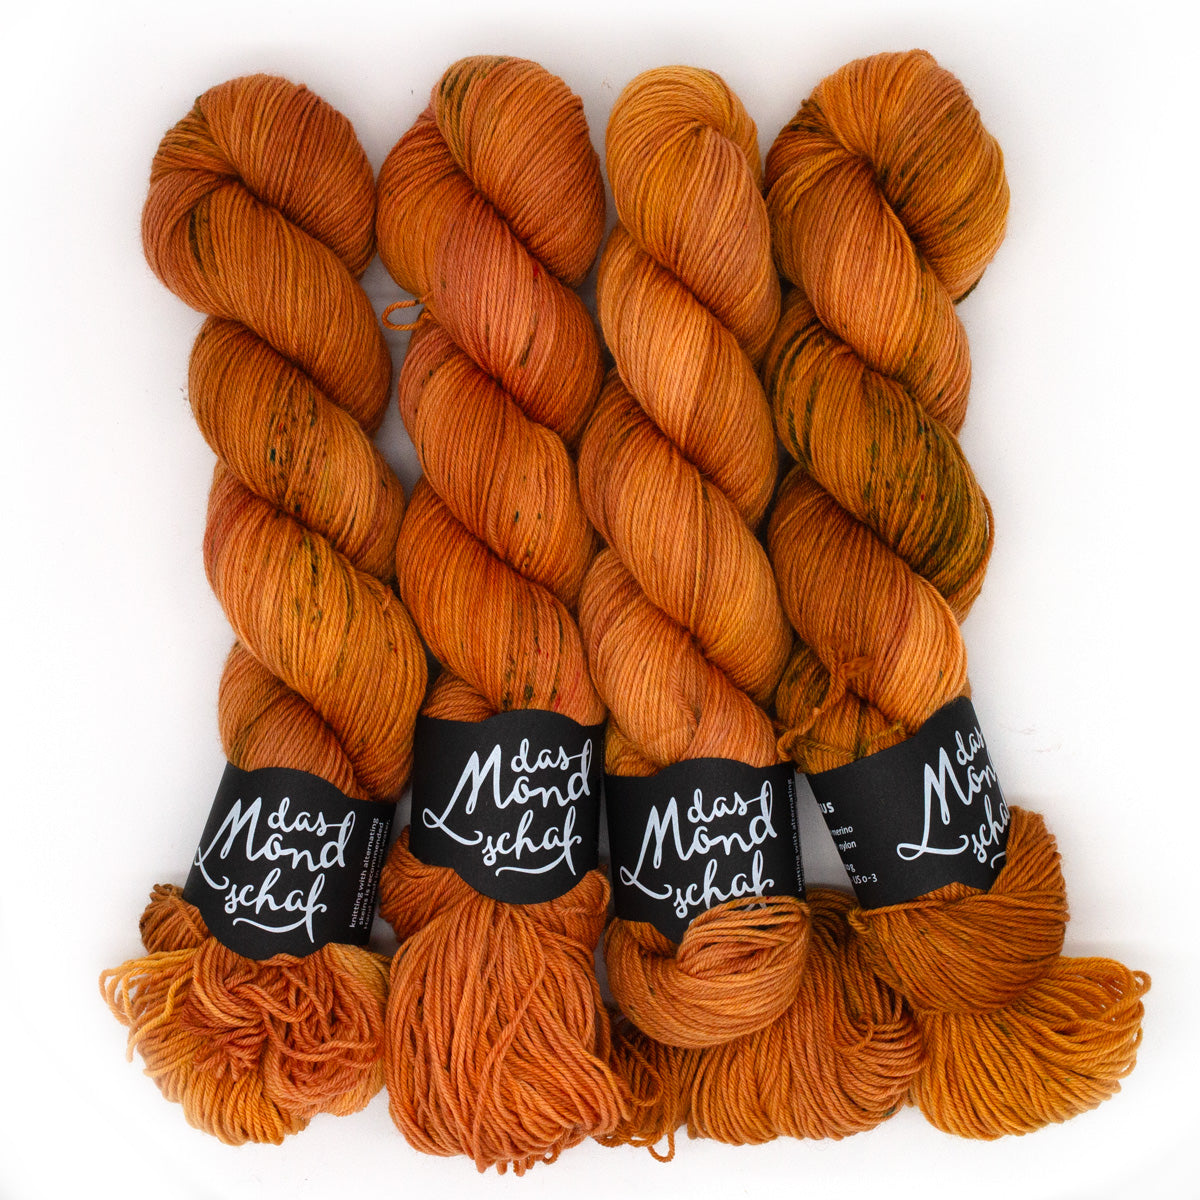 TRUTH OR CONSEQUENCES - 100g Merino Sock